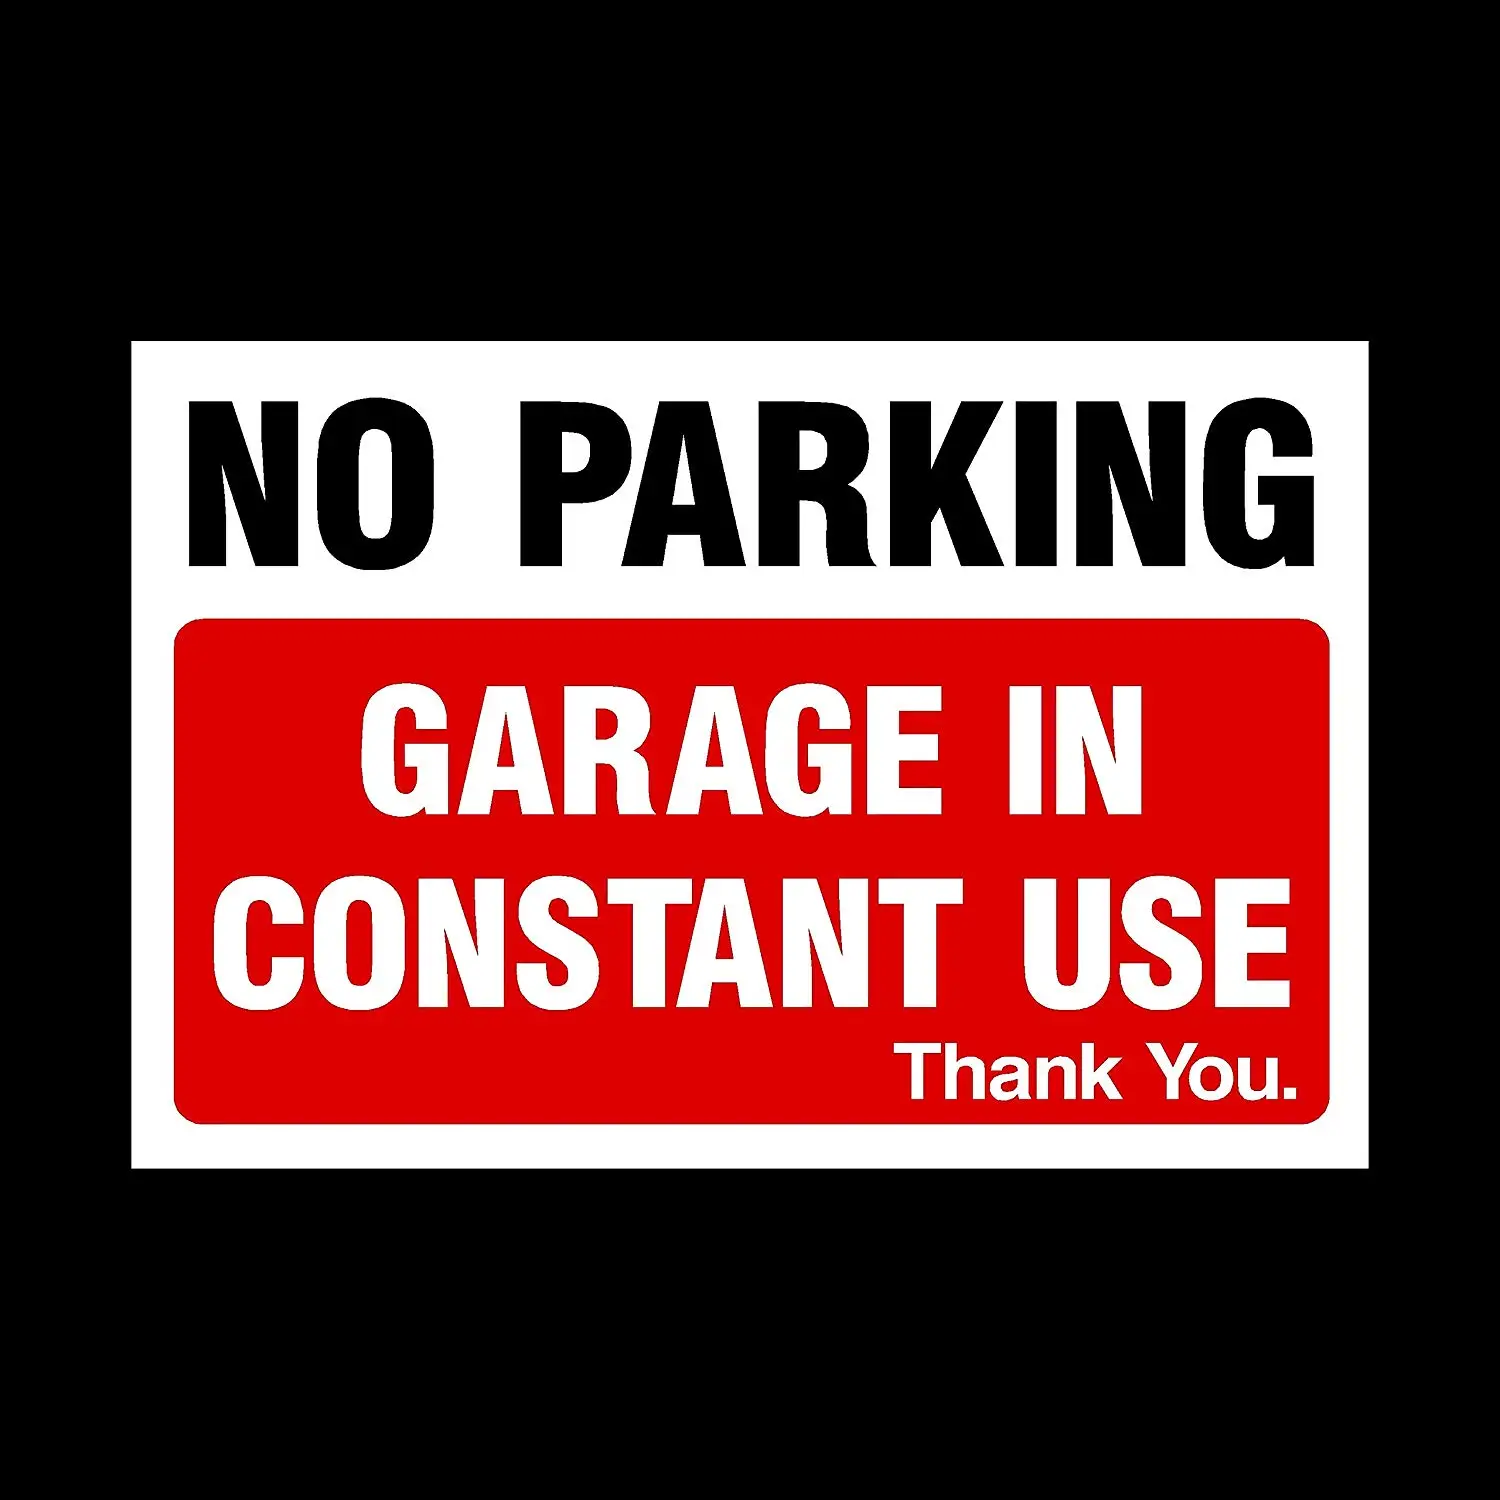 Sticker No Parking Infront of Gates All Sizes Plastic Sign Metal MISC170 